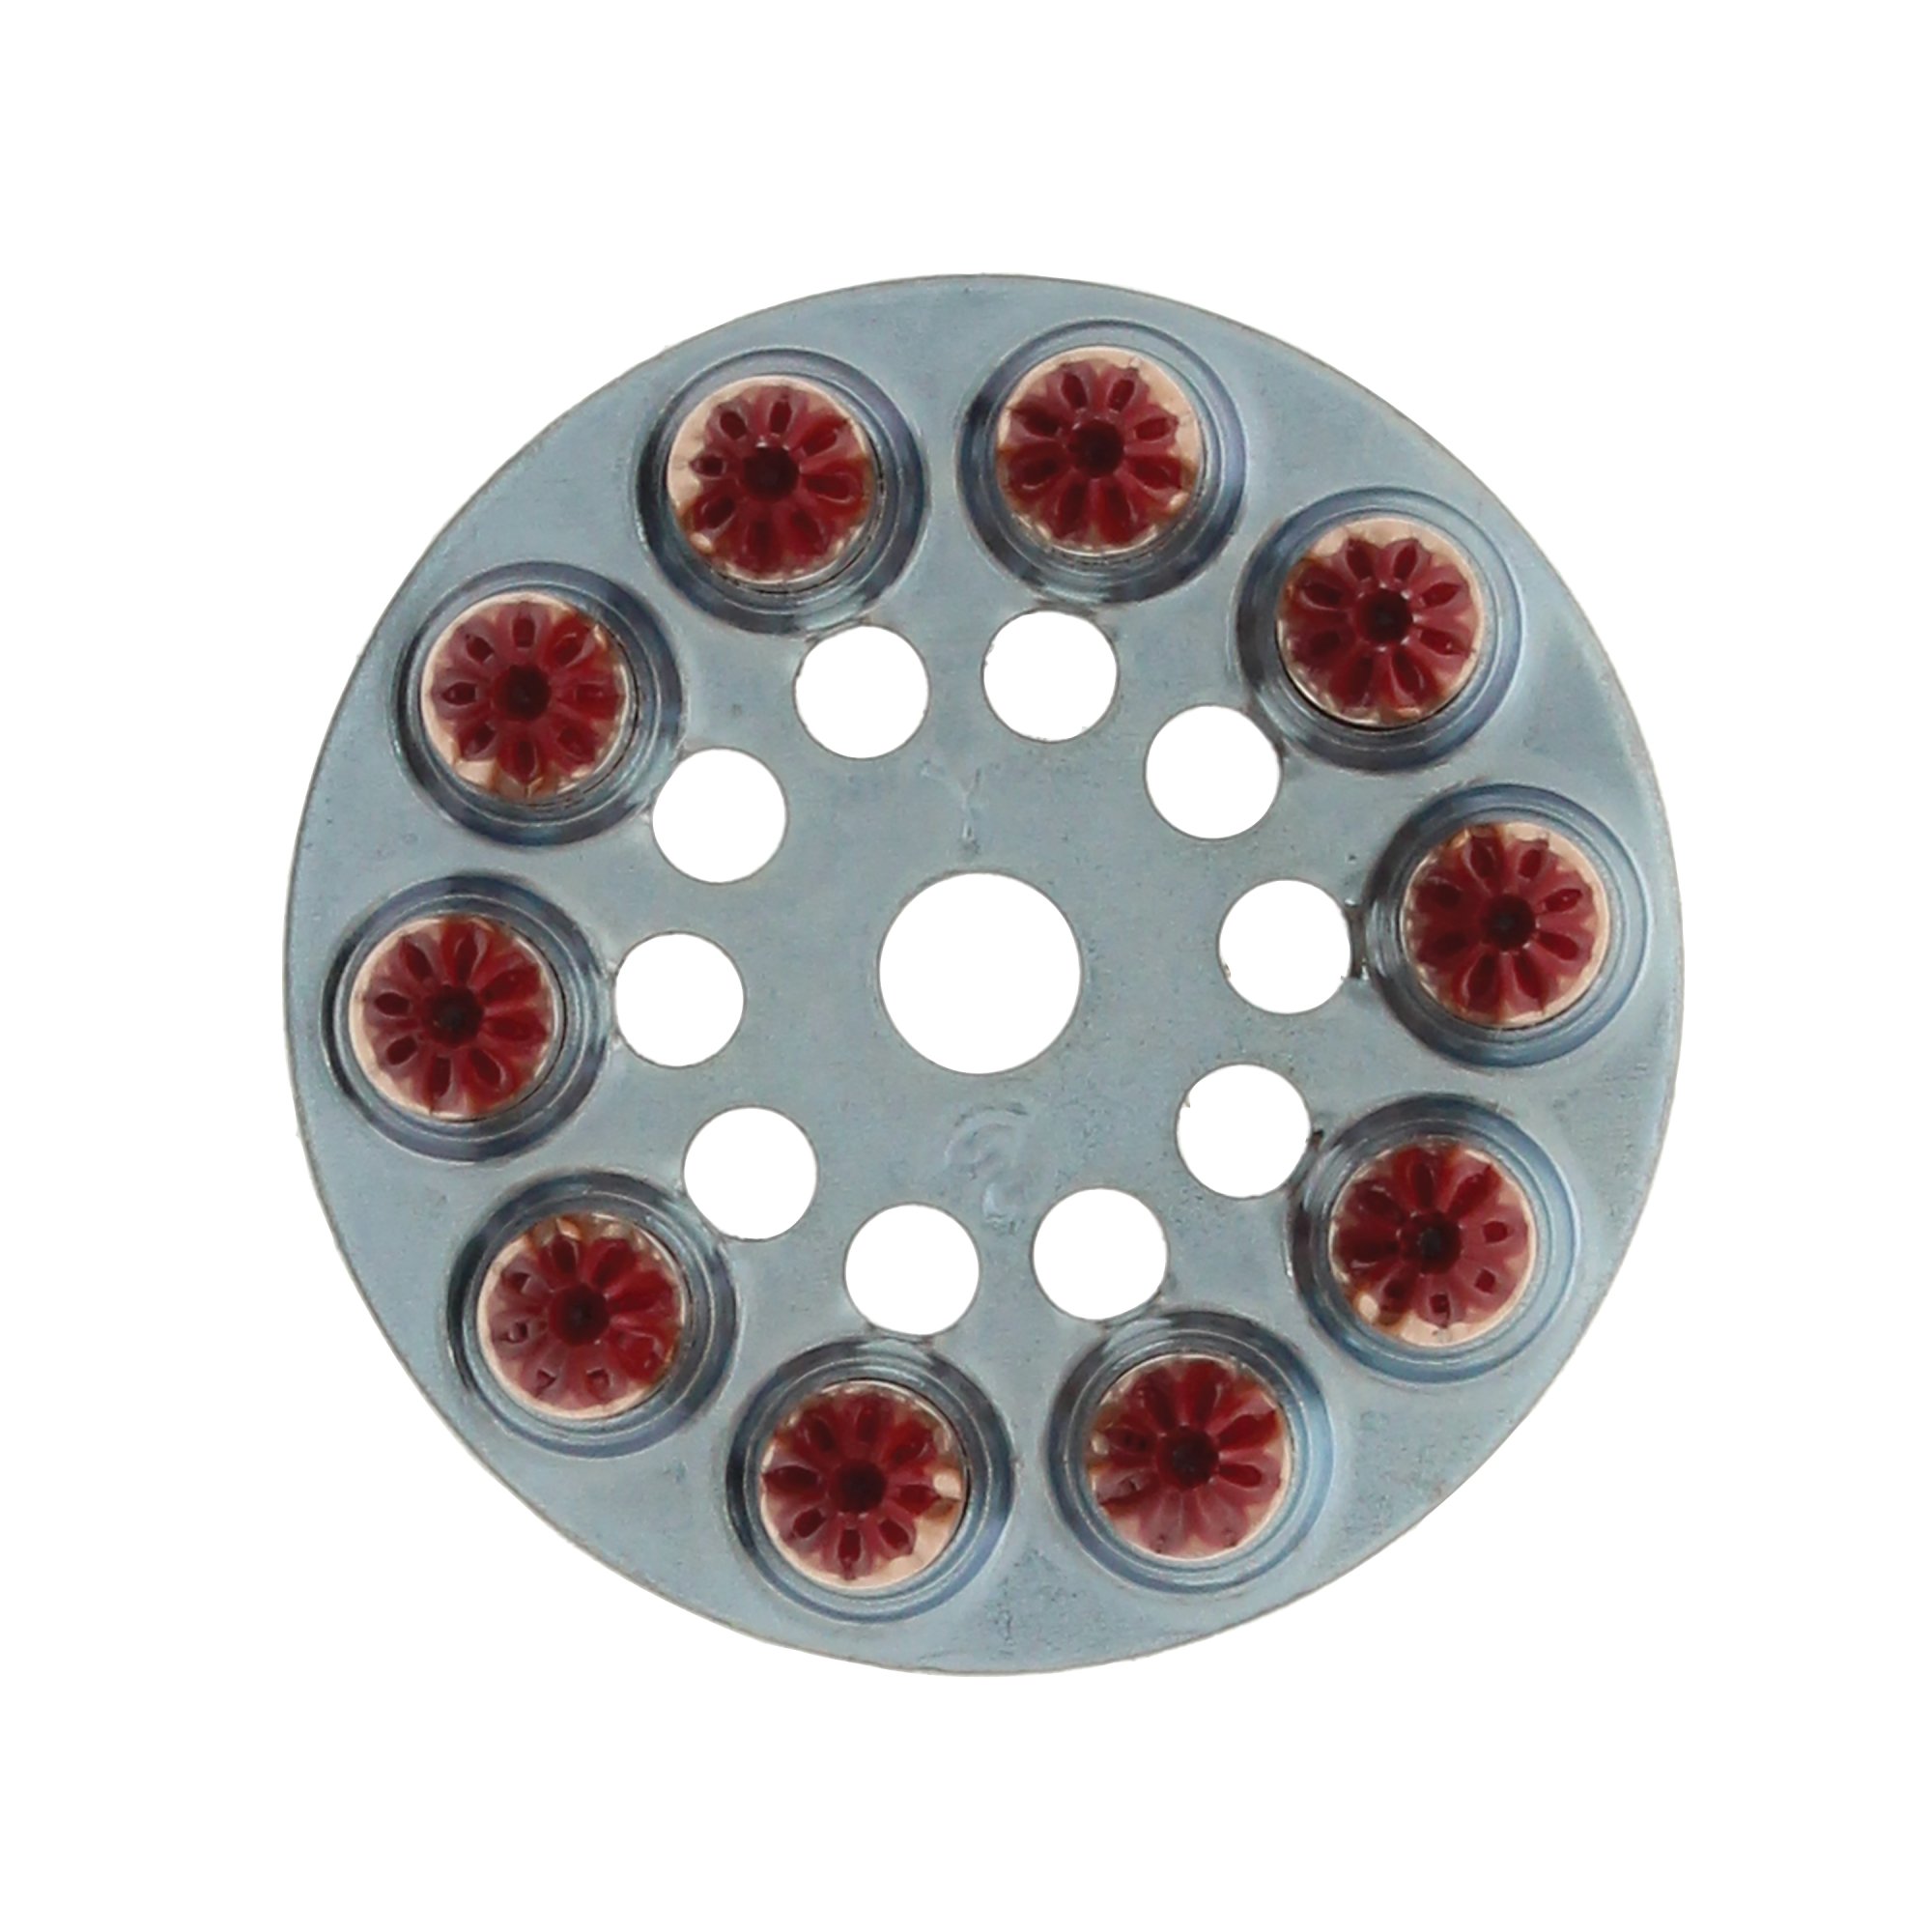 Spit Shot Fire Disc Cartridges for P230 & P560 (Box of 100)